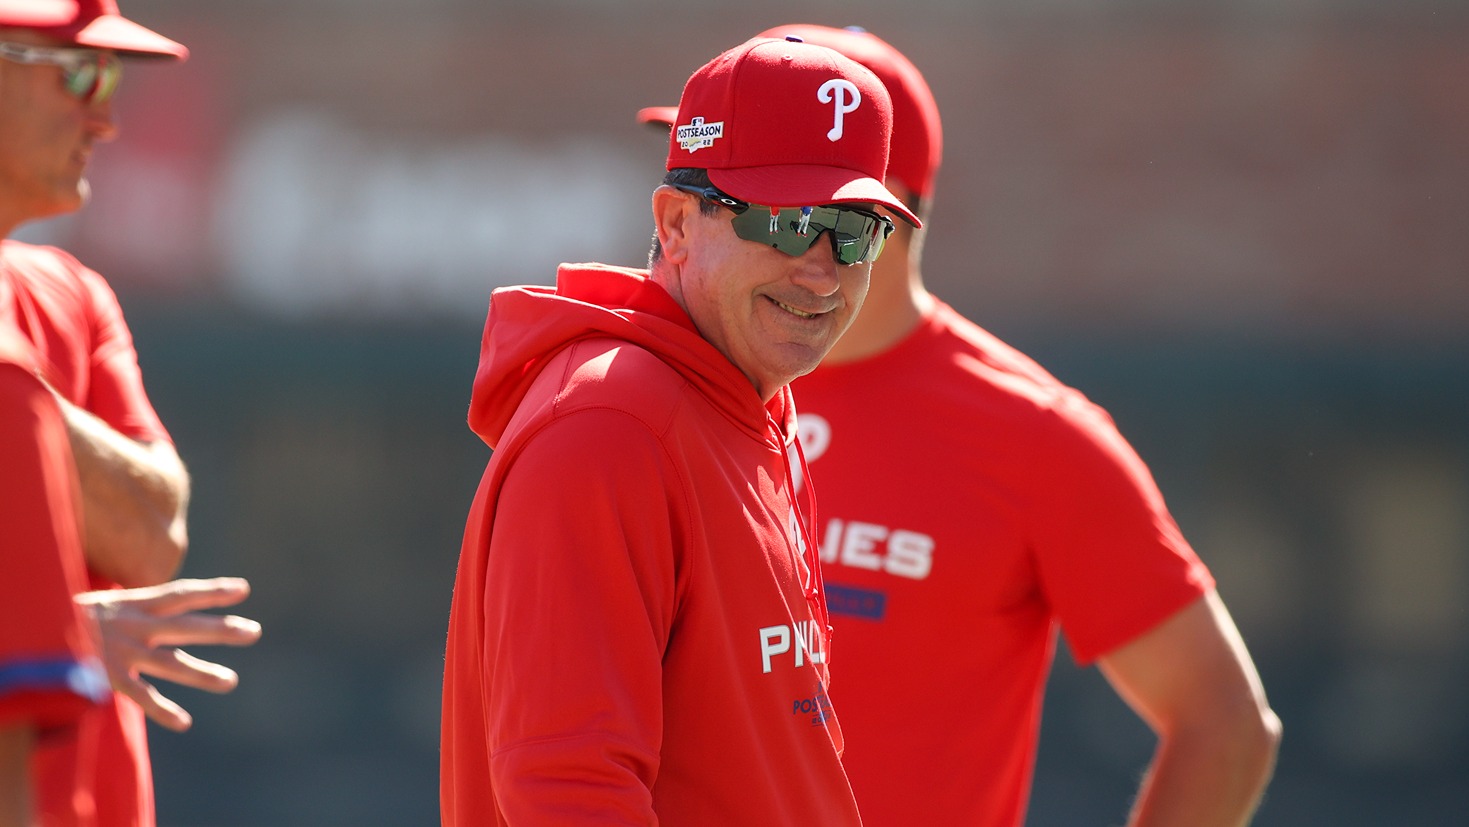 Interim manager no more: Phillies sign Rob Thomson to 2-year